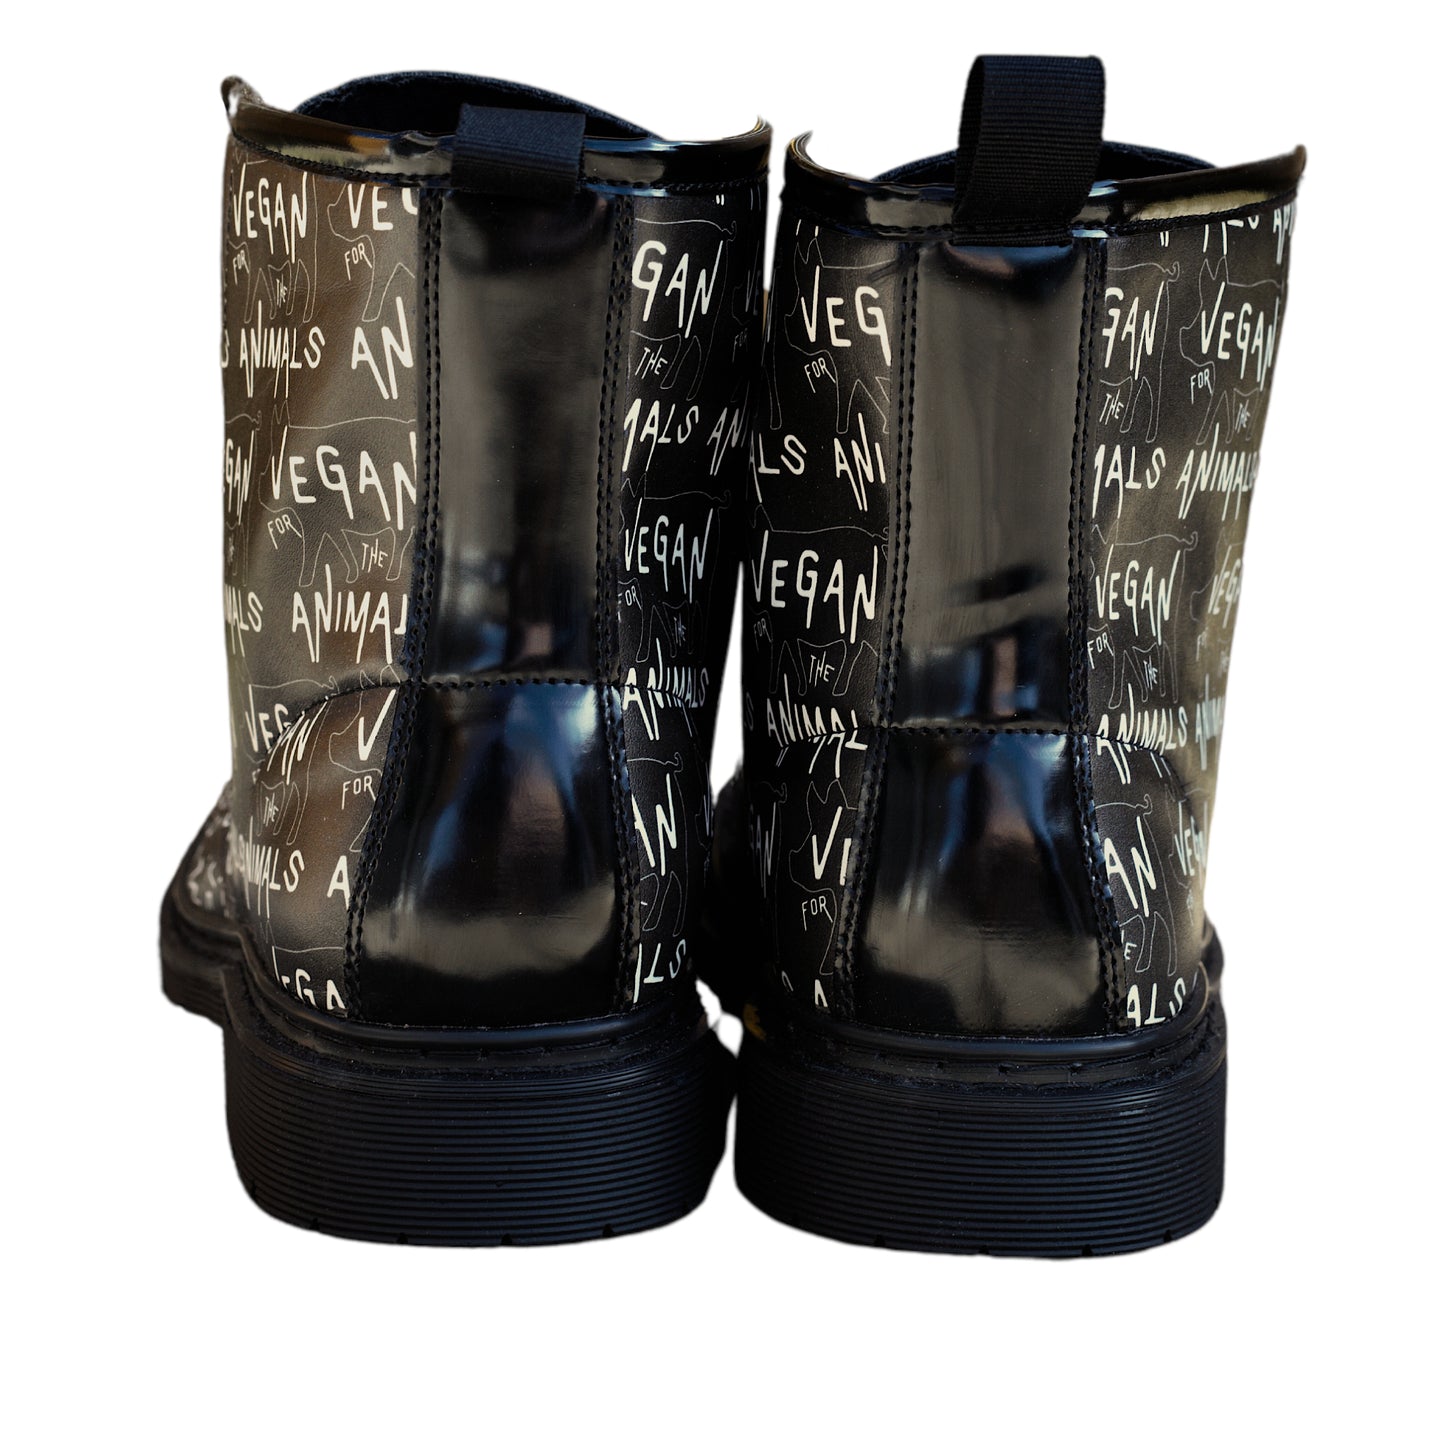 VEGAN For The Animals Dr Martin Styled Boots